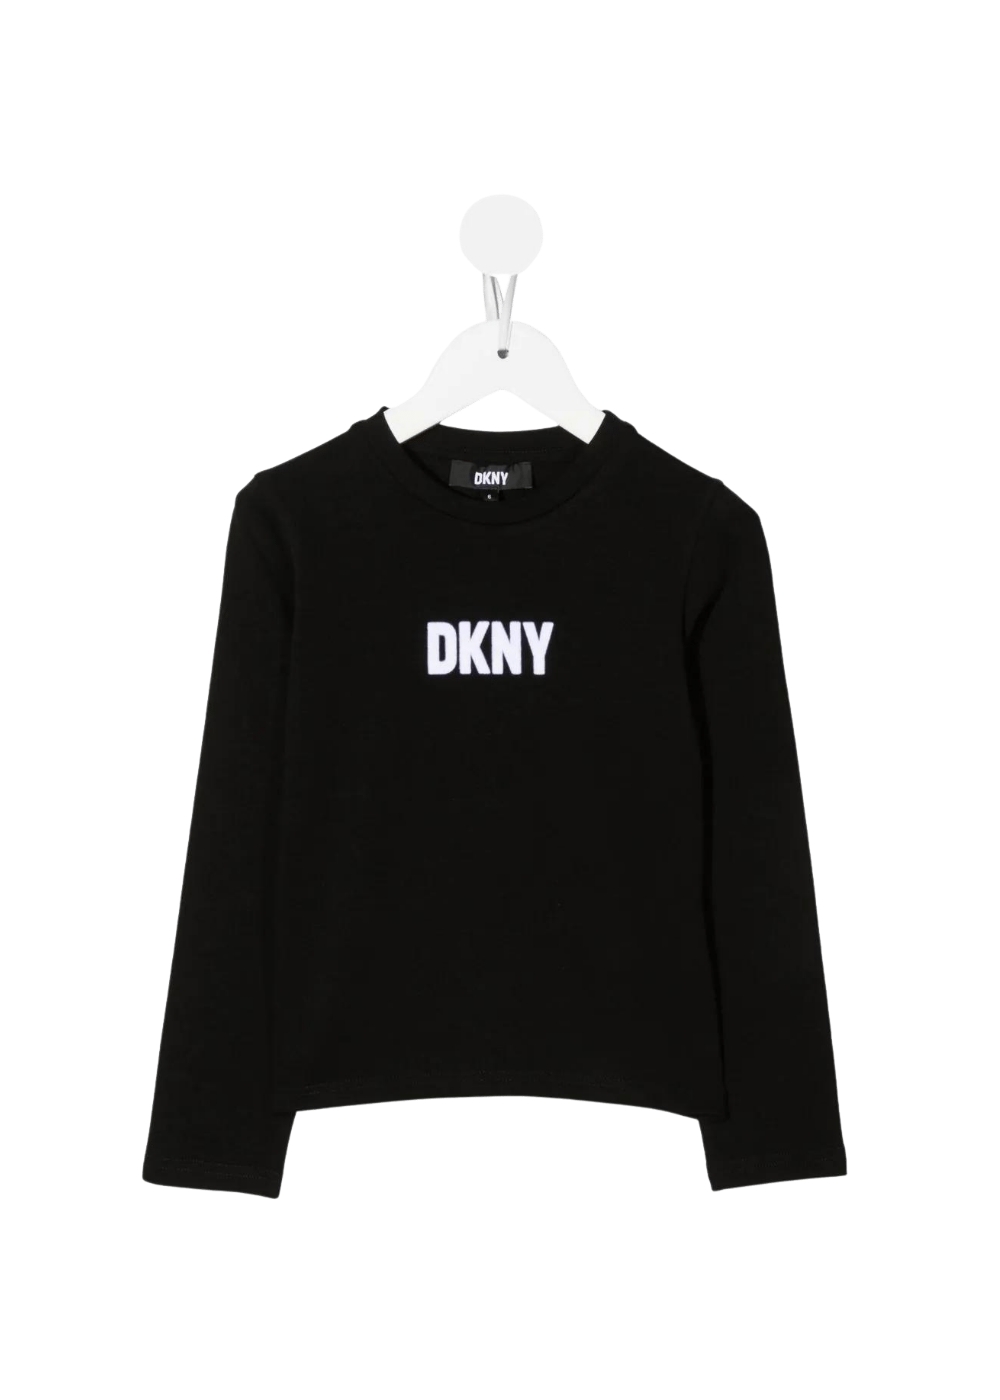 Featured image for “Dkny T-shirt con Ricamo”